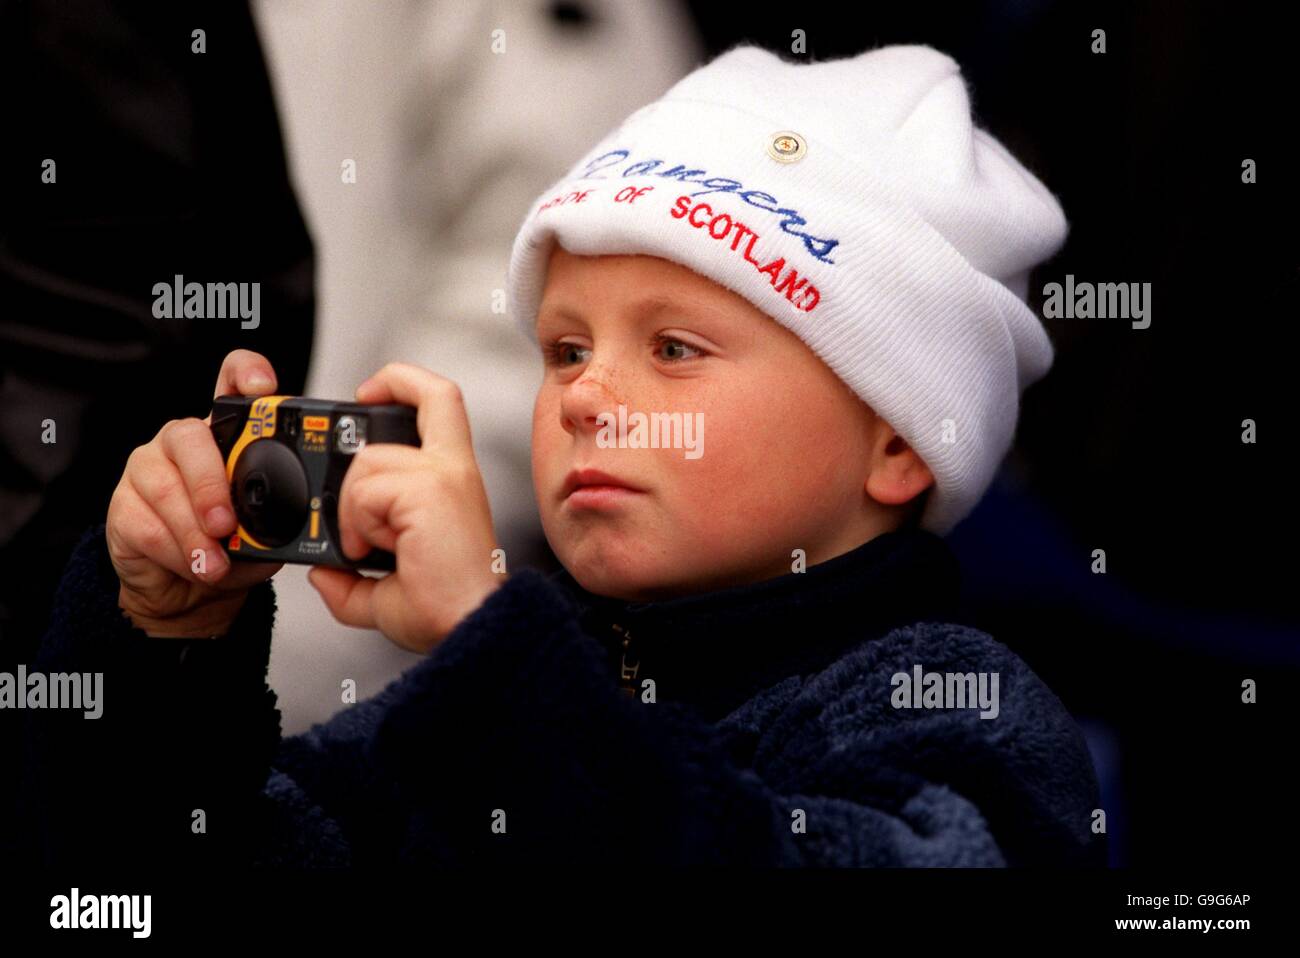 Soccer - Bank Of Scotland Premier League - Rangers v Celtic. A young Rangers fan takes some photos of his heroes Stock Photo